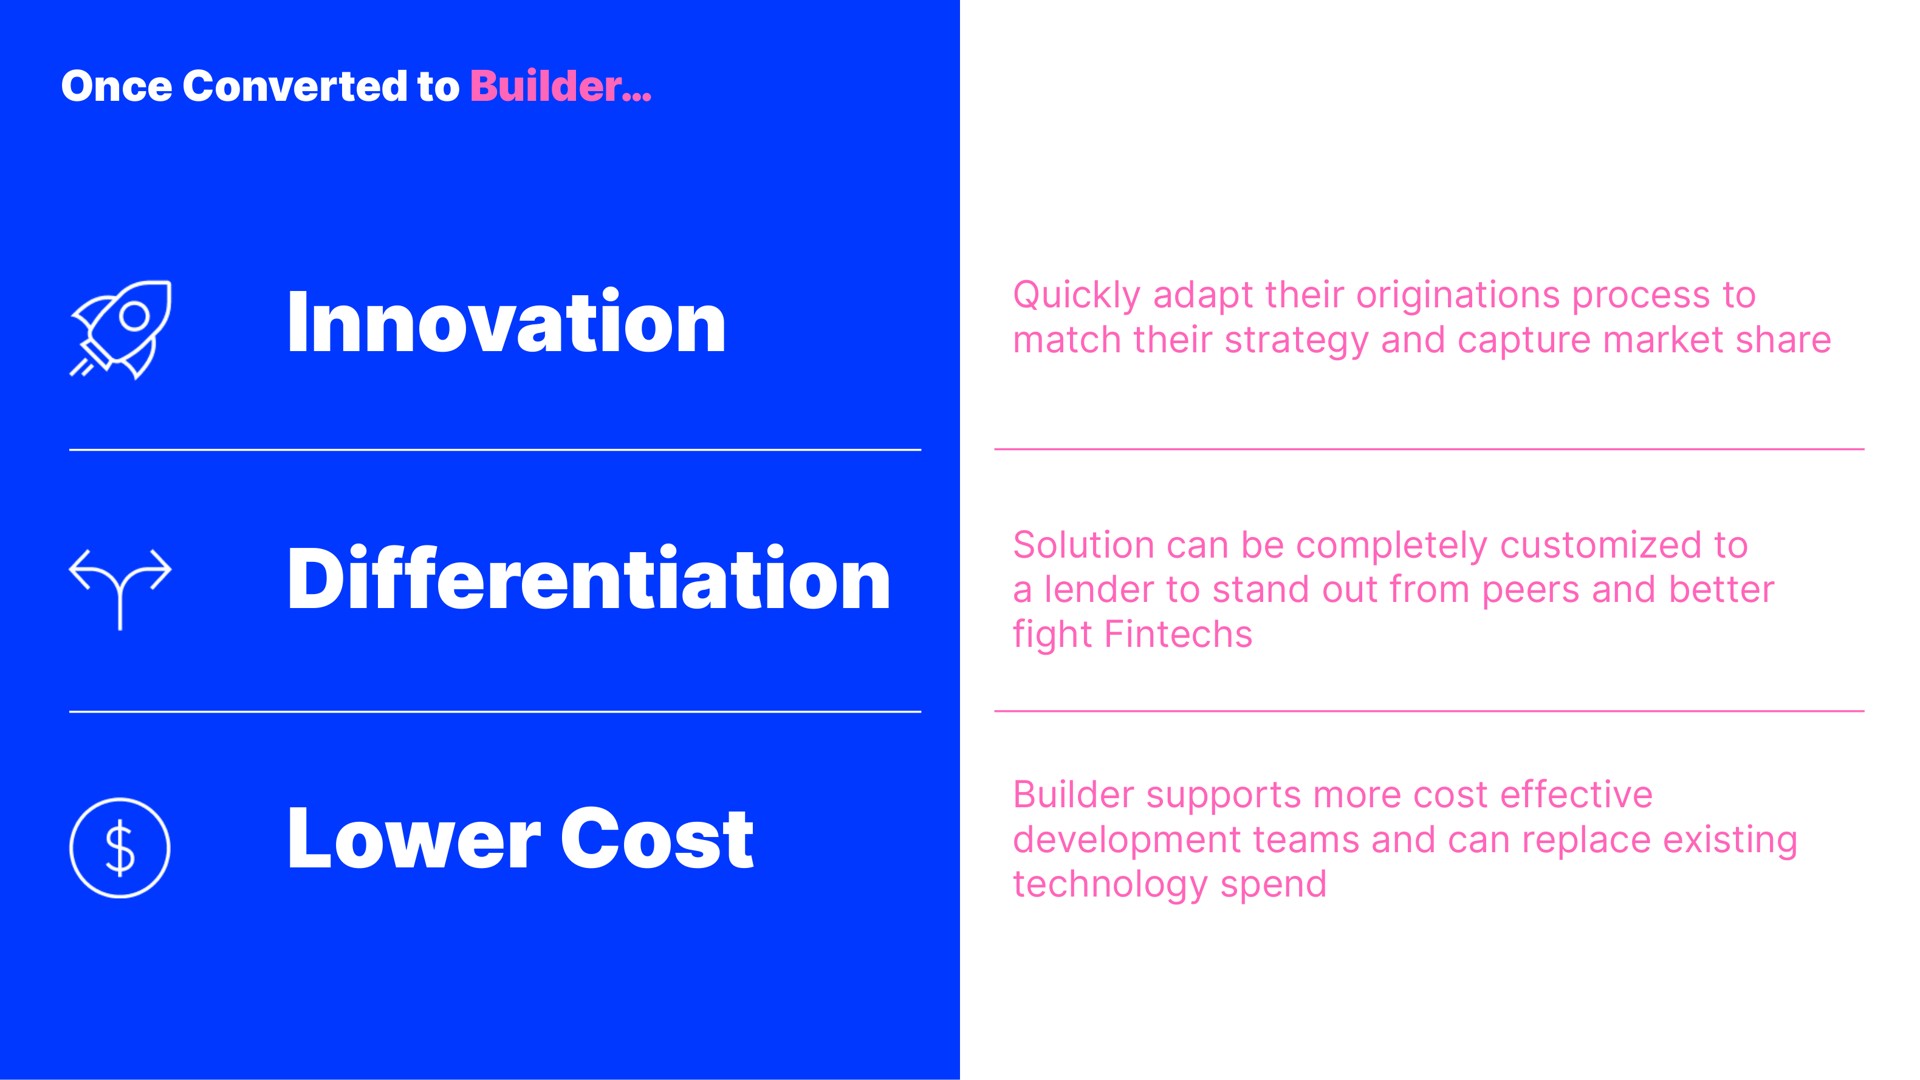 once converted to builder innovation quickly adapt their originations process to match their strategy and capture market share differentiation solution can be completely to a lender to stand out from peers and better fight lower cost builder supports more cost effective development teams and can replace existing technology spend ame | Blend